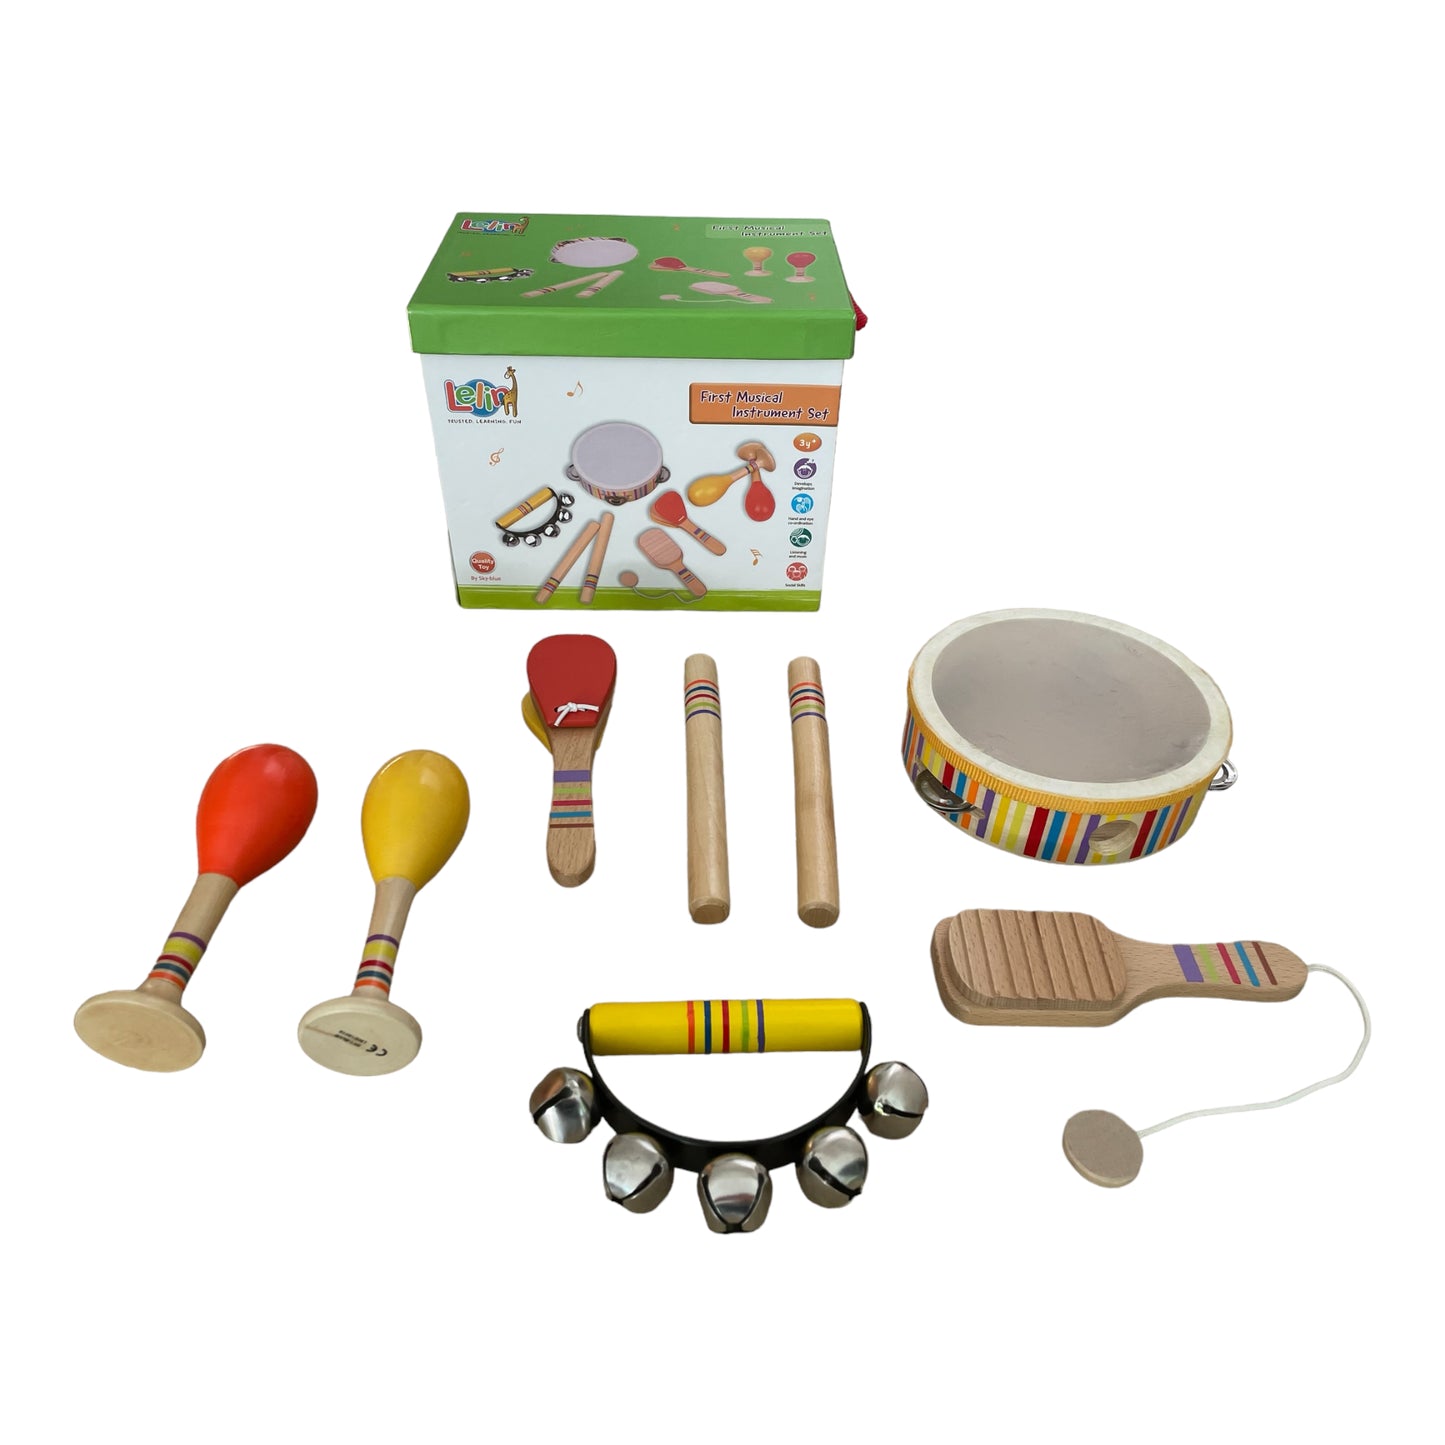 Lelin First Musical Instrument Set - 8 pieces